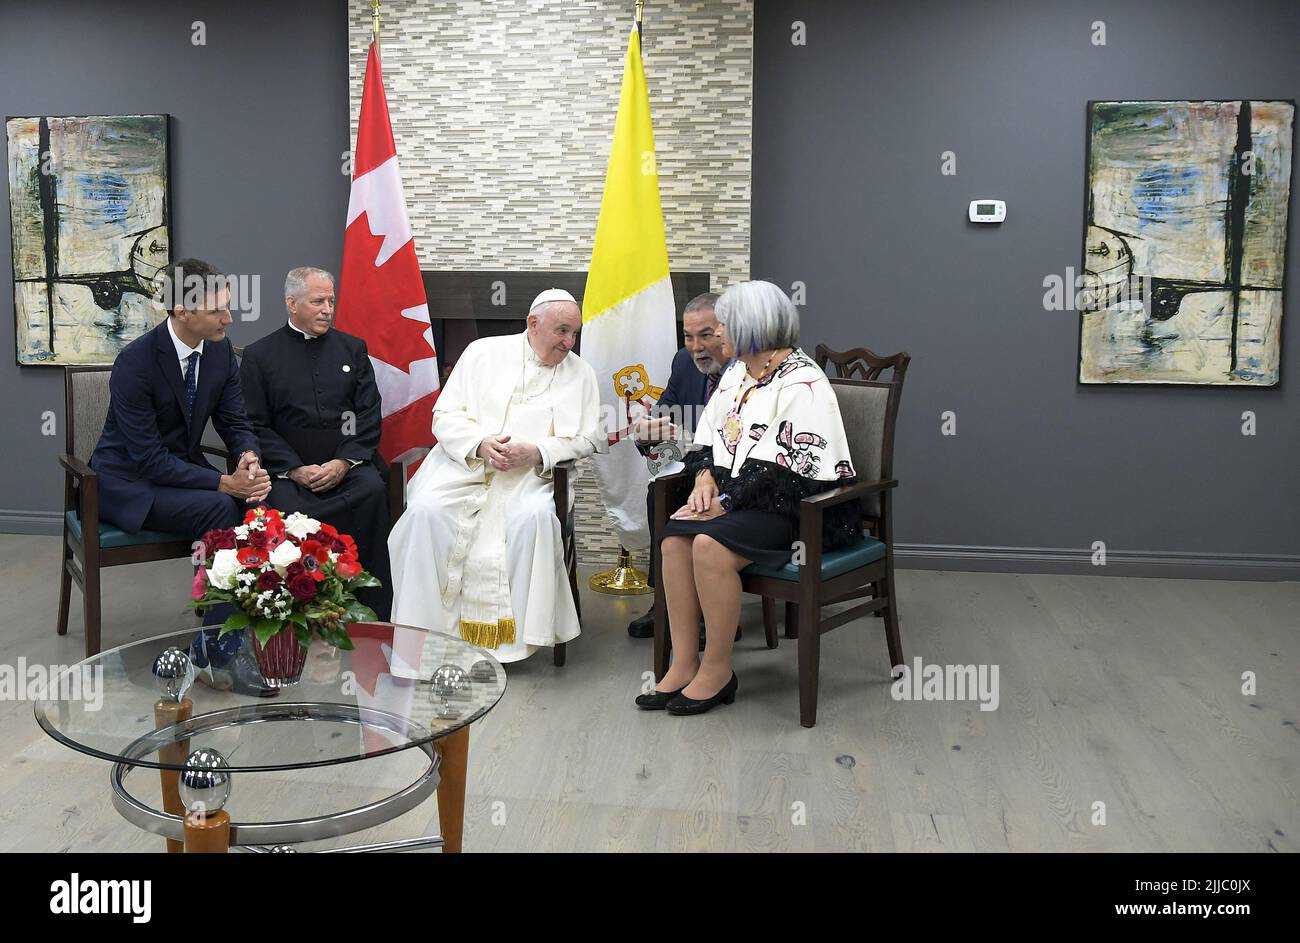 Edmonton, Canada. 24th July, 2022. Francis meets Canada's Prime Minister Justin Trudeau (left) and members of the First Nations during his welcoming ceremony at Edmonton International Airport, AB, western Canada on July 24, 2022. Pope's visit to Canada is aimed at reconciliation with Indigenous people for the Catholic Church's role in residential schools. Photo by Vatican Media (EV)/ABACAPRESS.COM Credit: Abaca Press/Alamy Live News Stock Photo